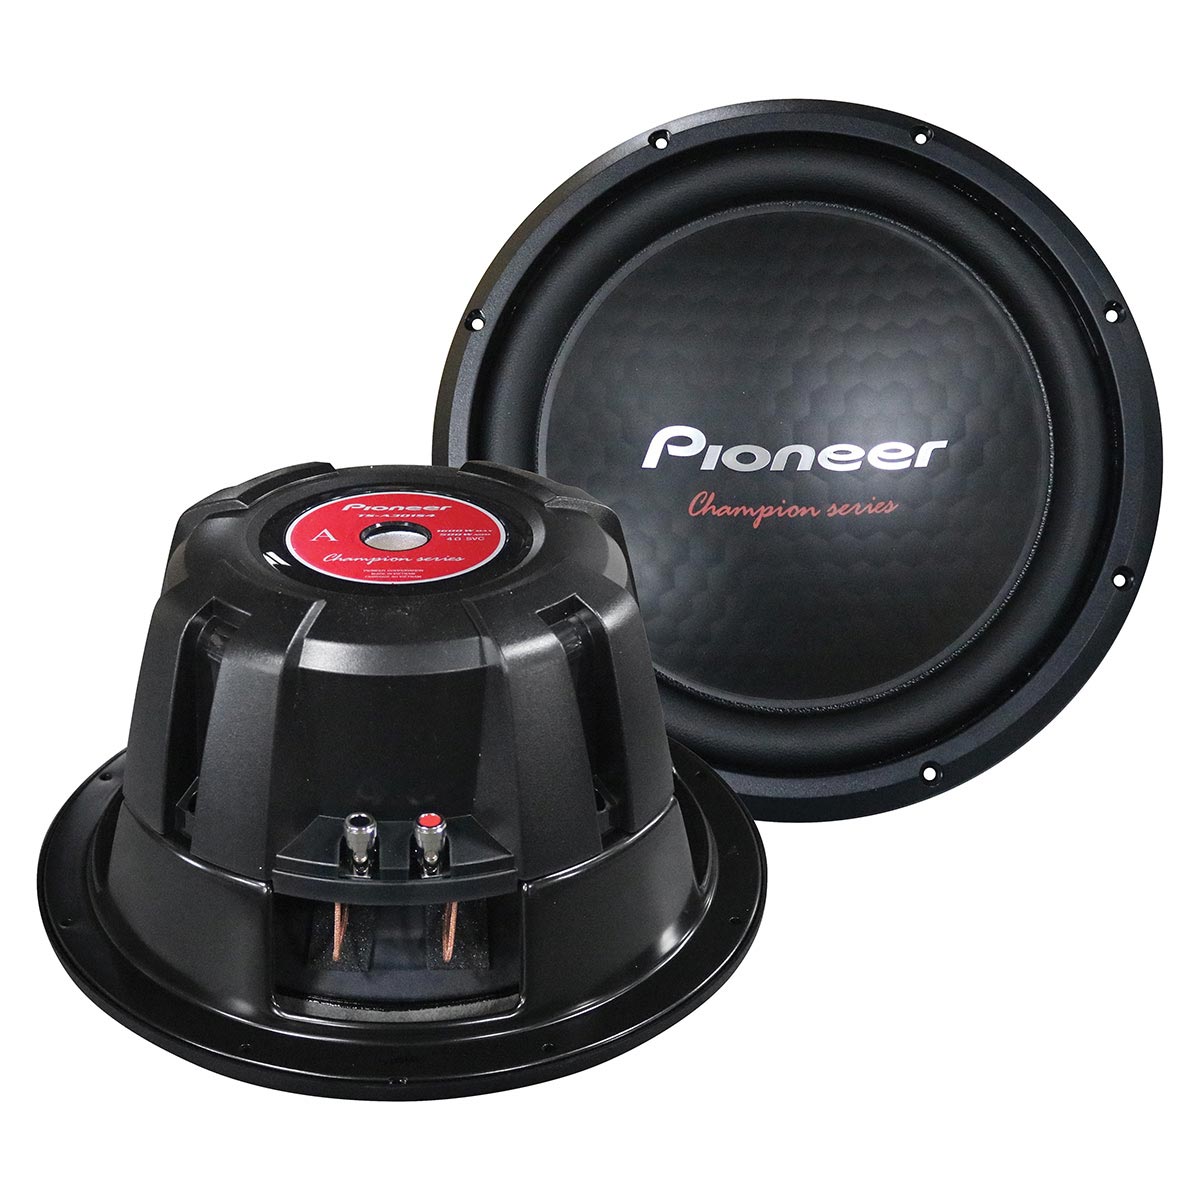 PIONEER TS-A301S4 12” Woofer 500W RMS/1600W Max Single 4 Ohm Voice Coil